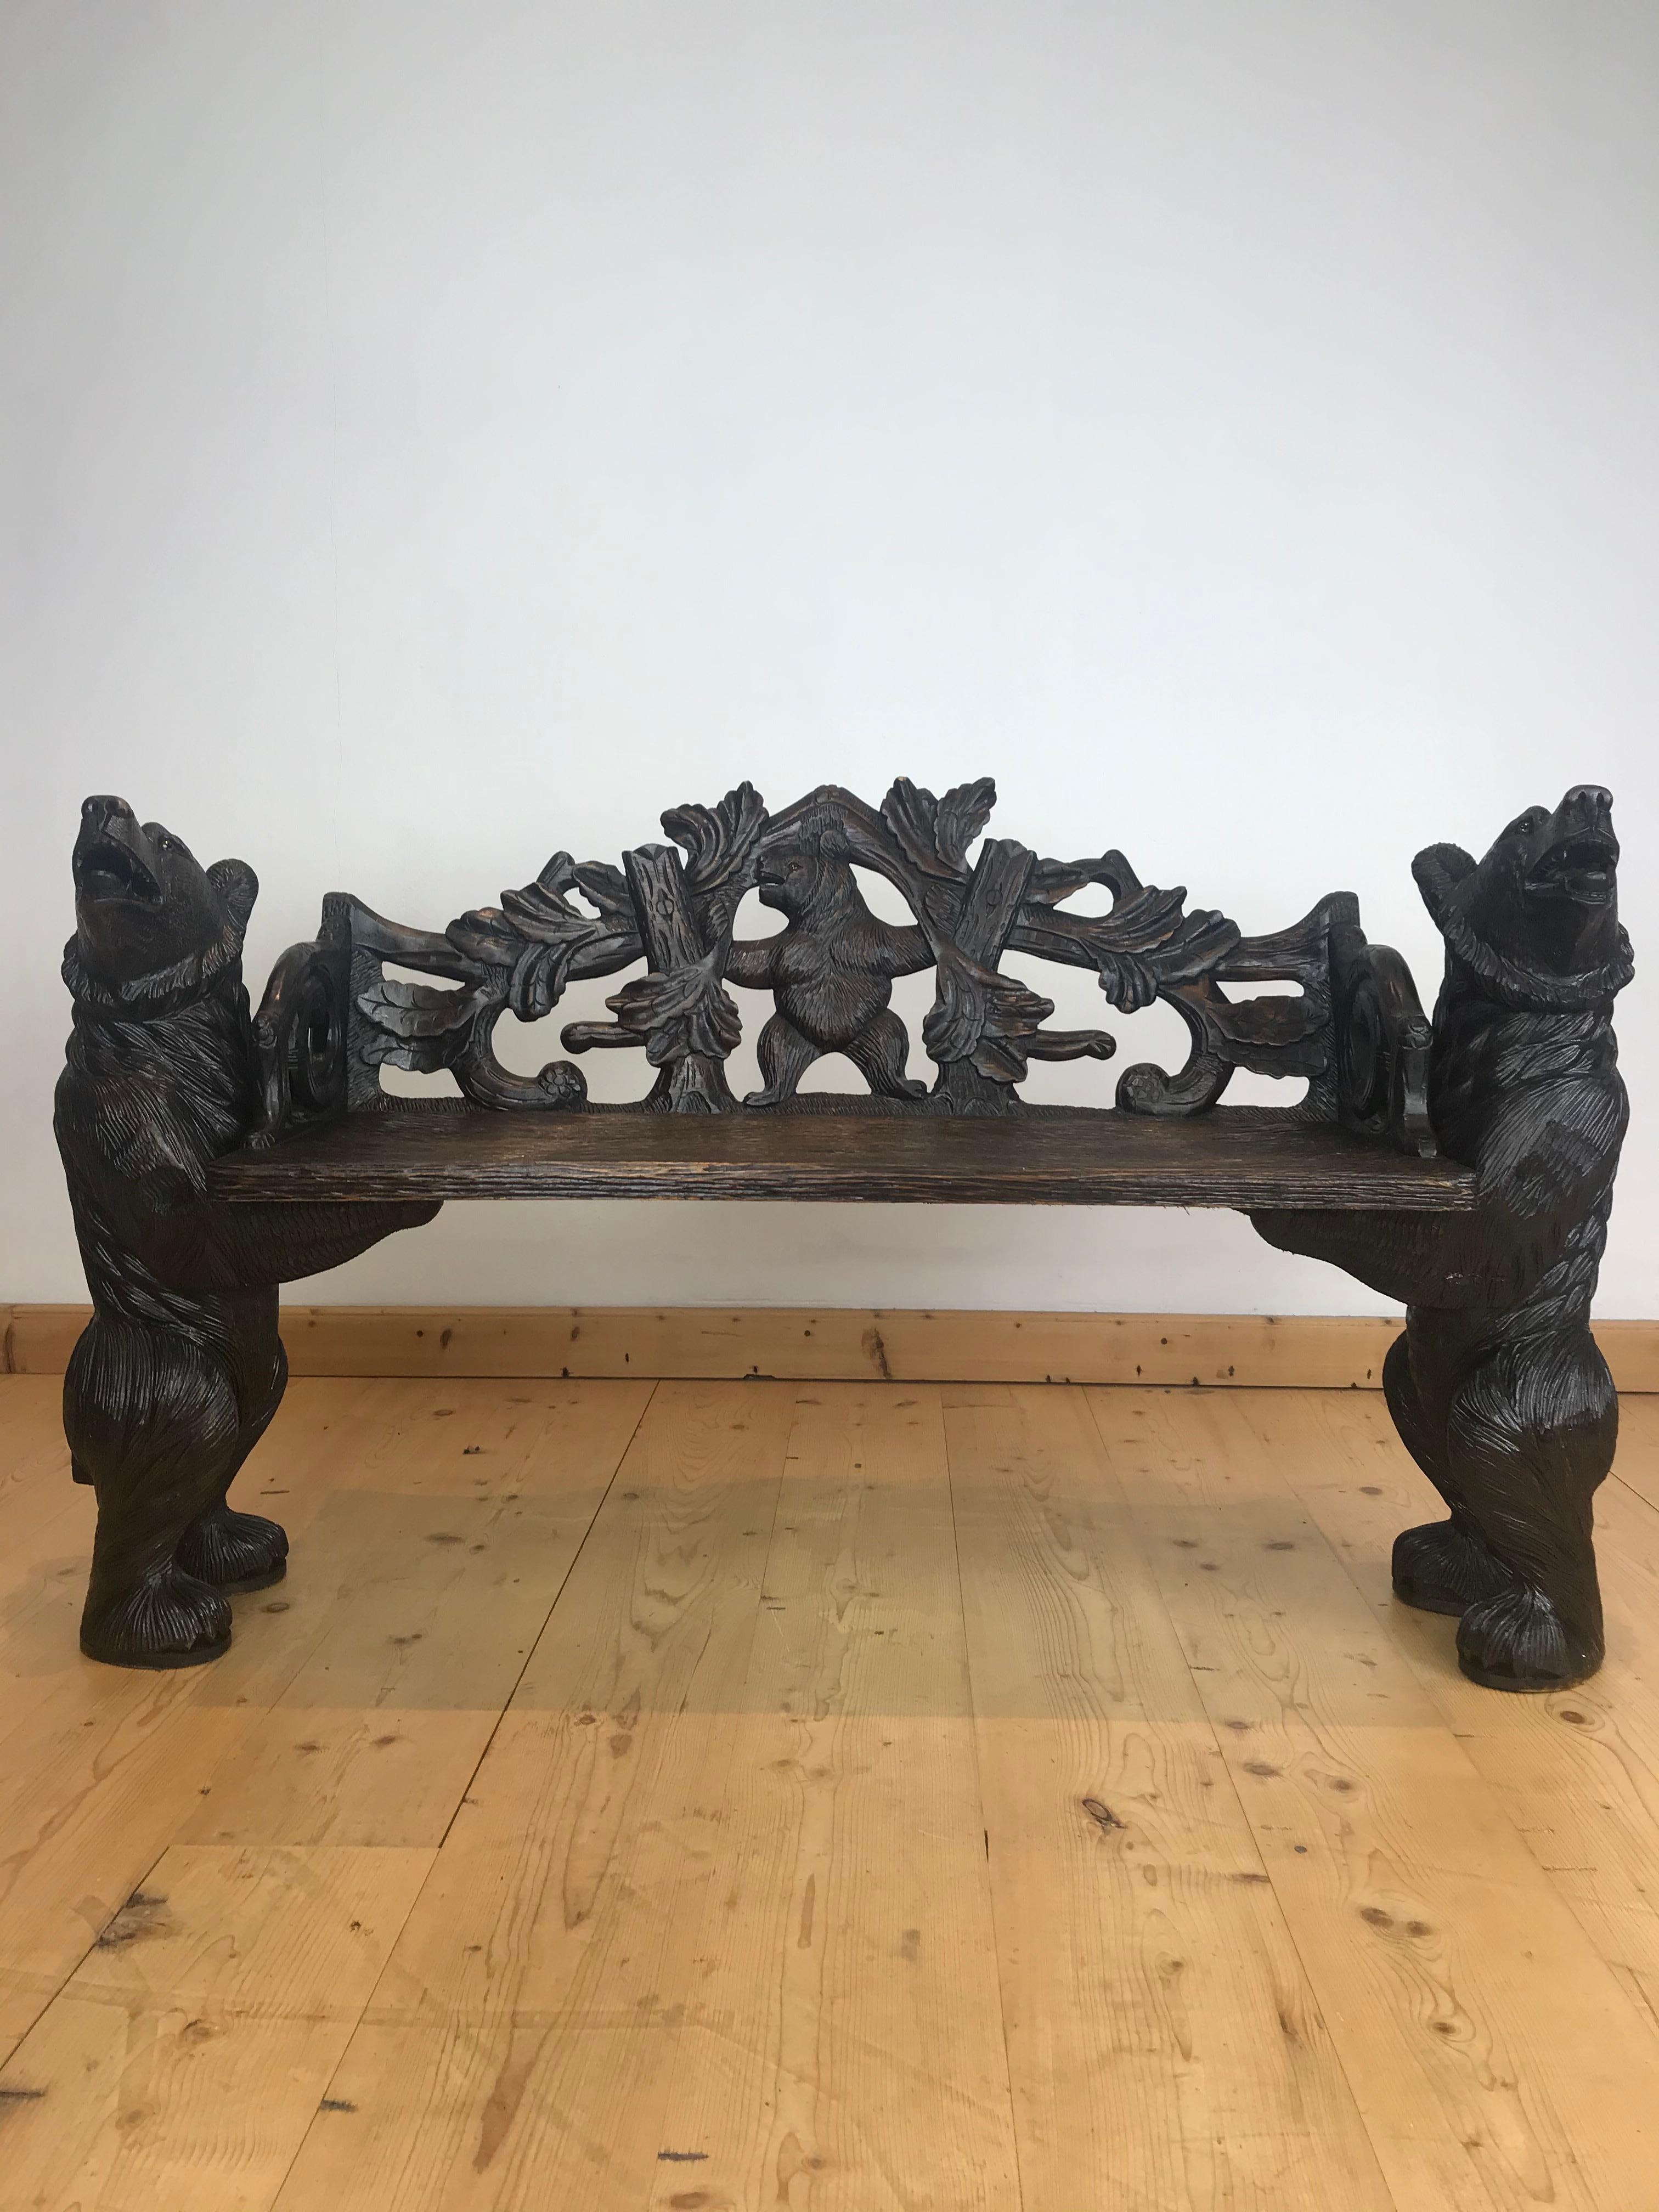 Black Forest style bear bench of the 20th century. This hall bench consists of 2 bears holding the bench. As well the bears as the bench are very detailed. The standing bears look impressive as they are strong to hold the seat. They have glass eyes.